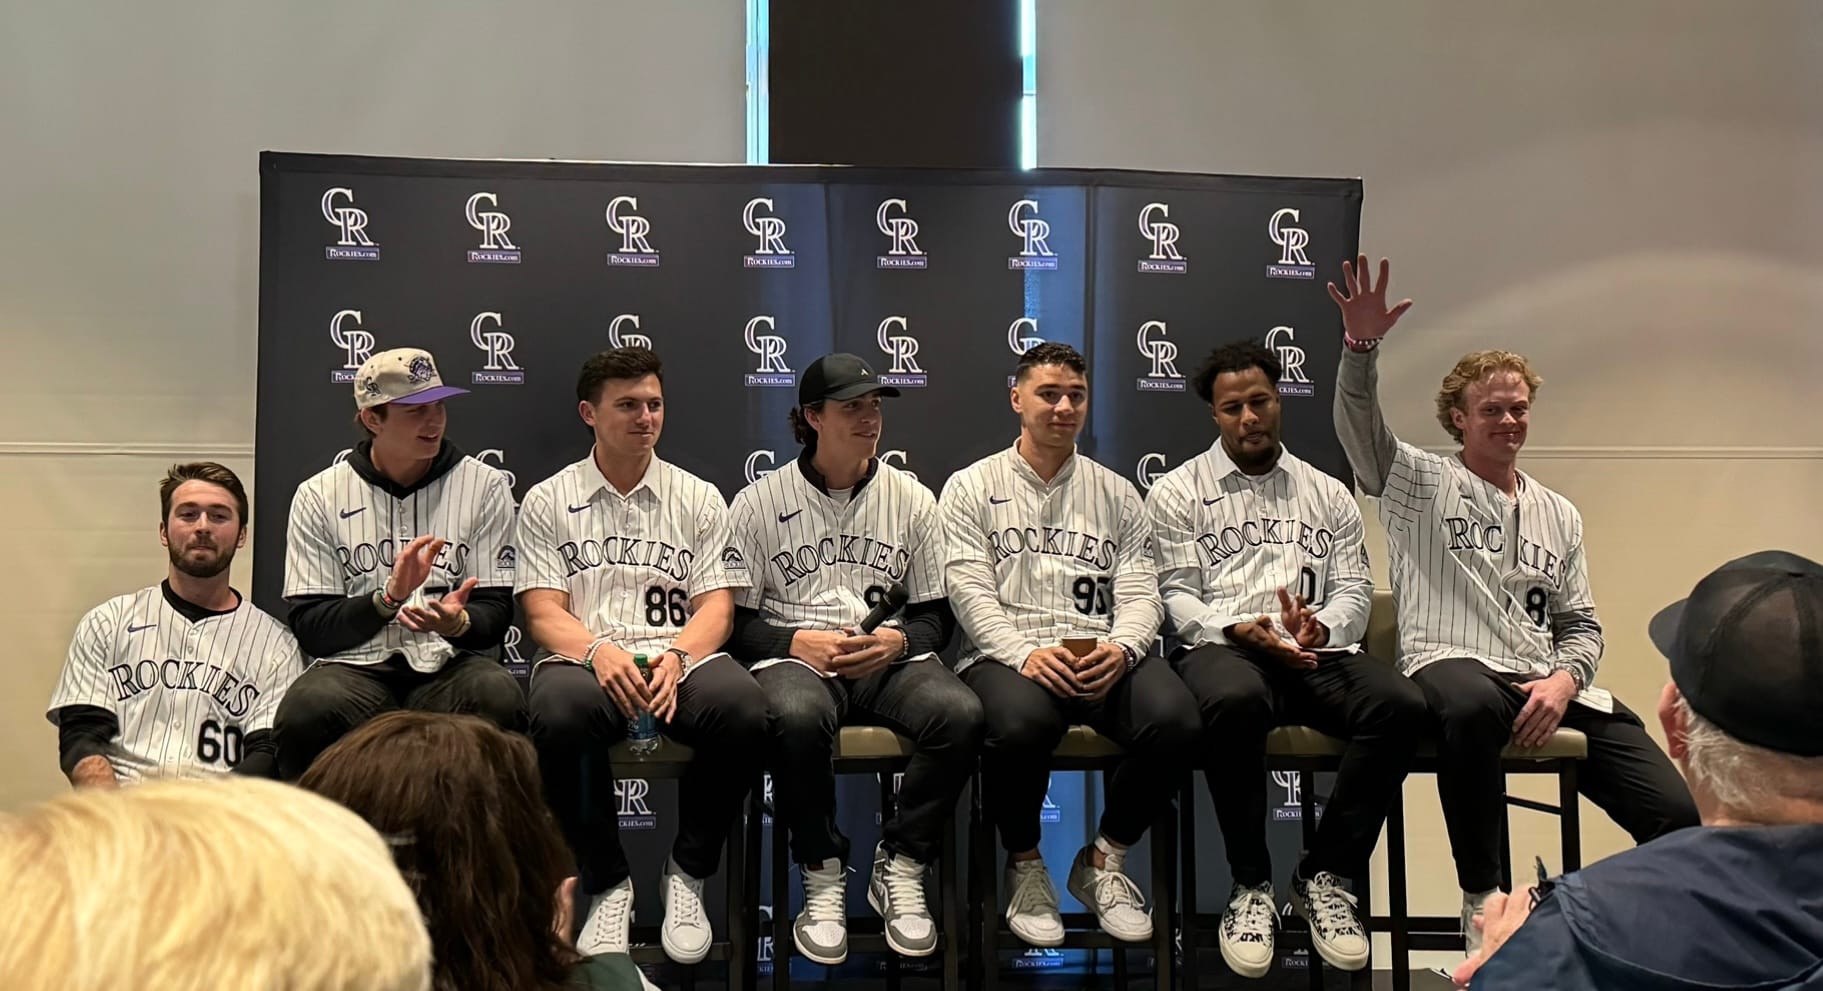 This pic shows the prospects panel at RockiesFest, including Thompson, Veen, Romo, Dollander, Hughes, Hill, and Williams. They’re wearing pinstriped jerseys and generally looking very fit and ready to go.